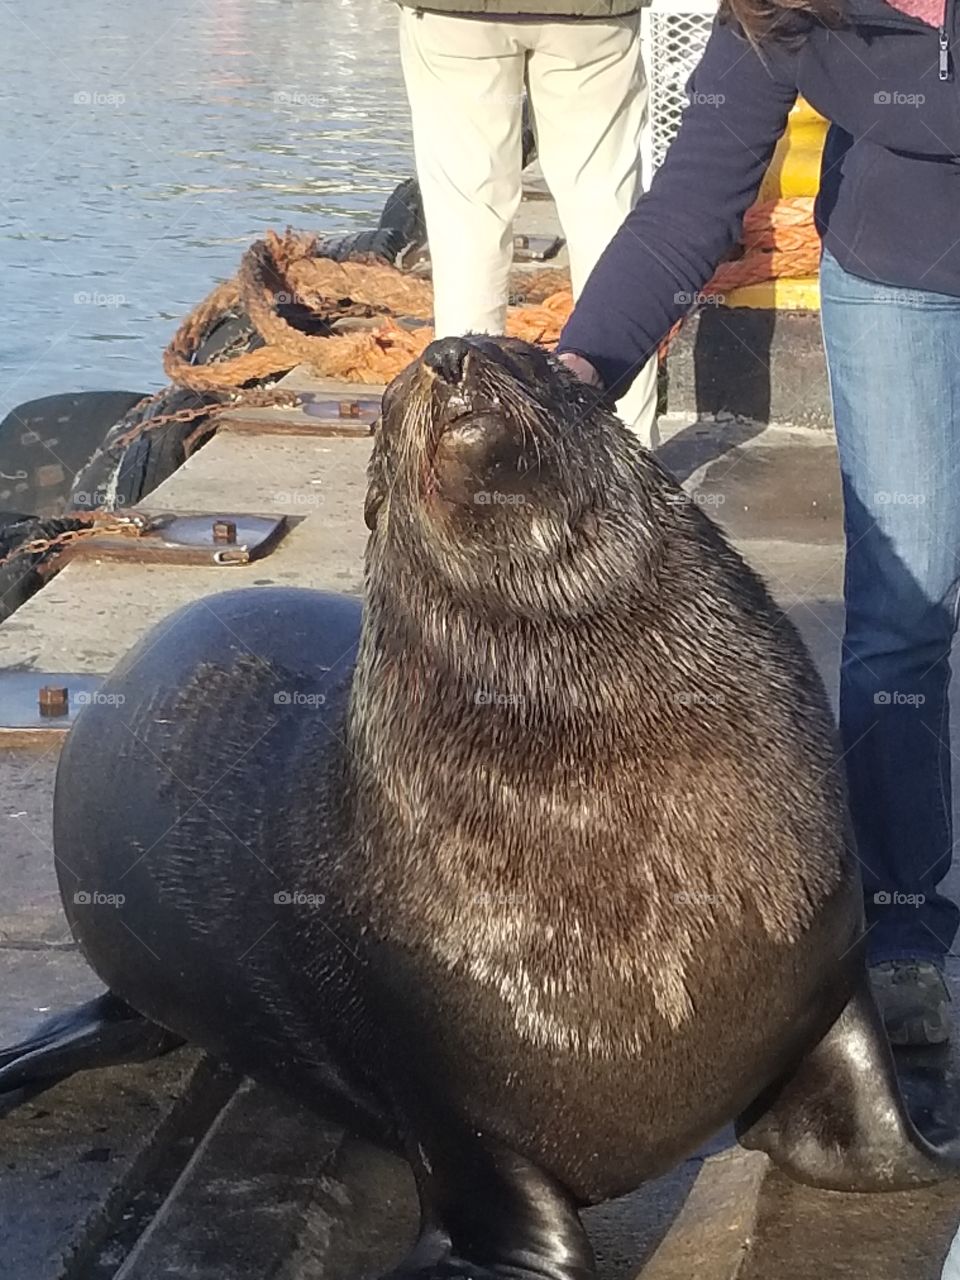 Papi the seal waits for fish